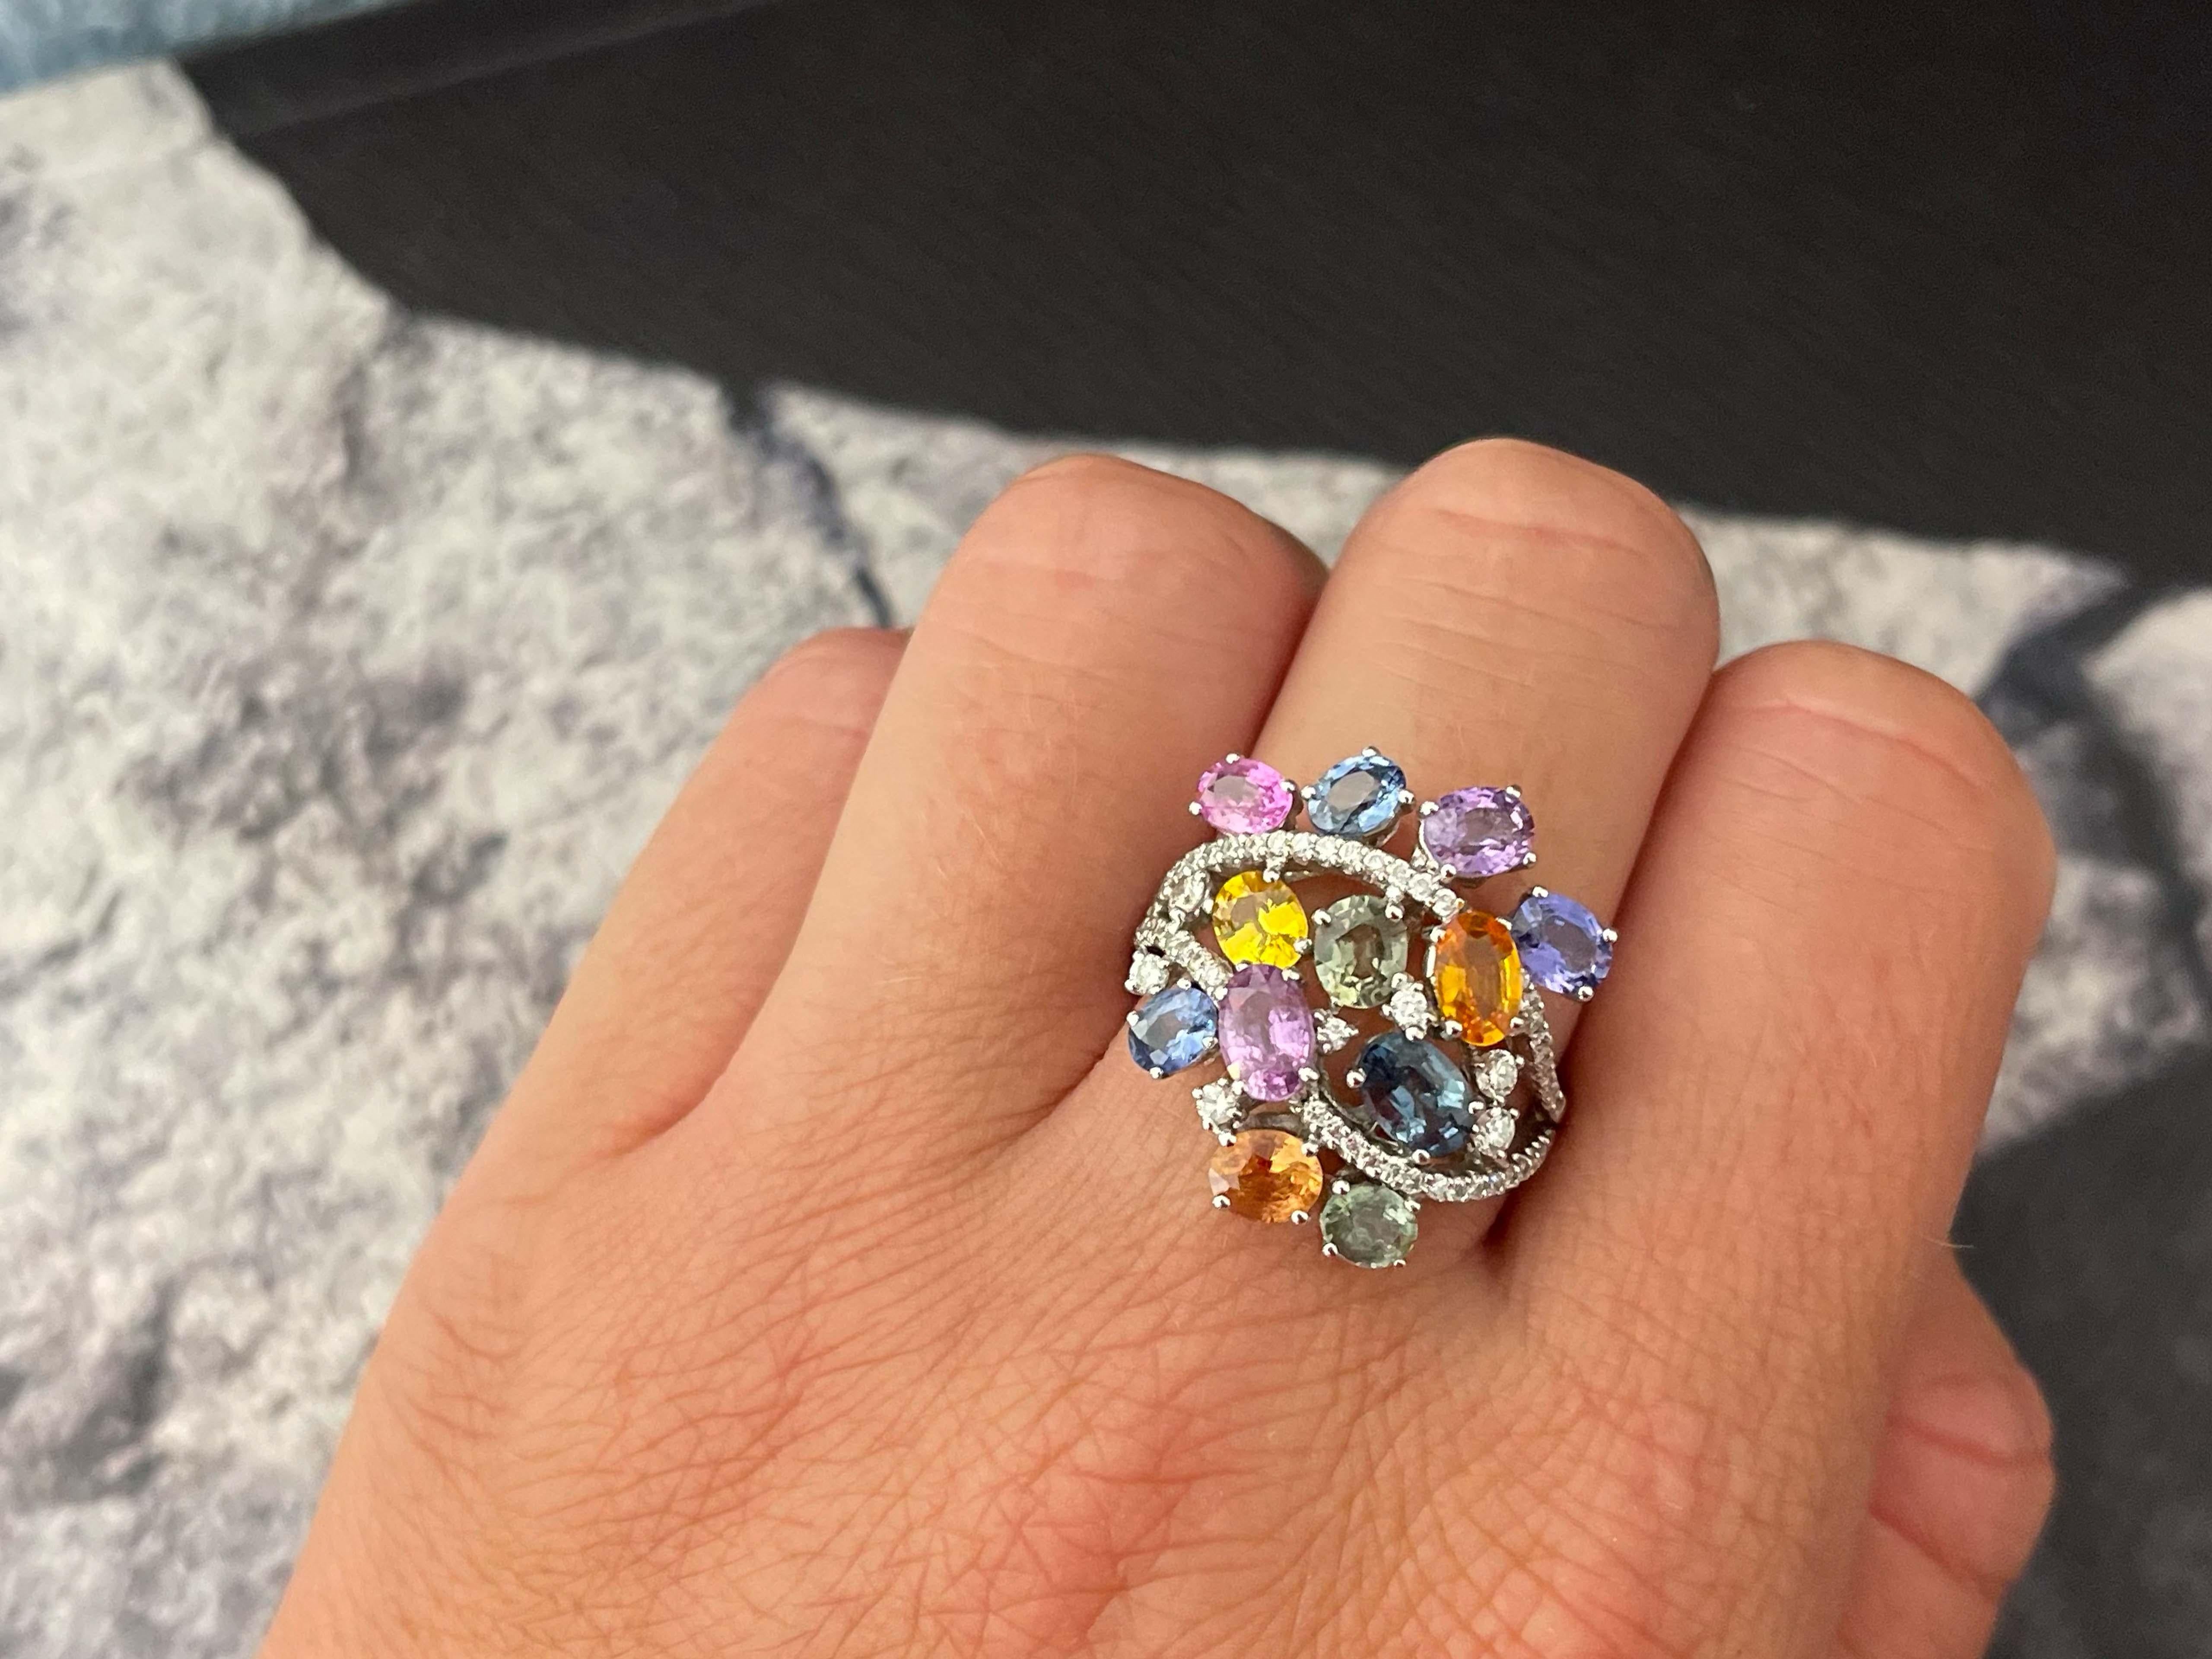 Item Specifications:

Metal: 18k White Gold

Style: Statement Ring

Ring Size: 8.25 (resizing available for a fee)

Total Weight: 8.4 Grams
​
​Gemstones: pink, yellow, blue topaz, purple and green amethyst, purplish blue tanzanite
Diamond Count: